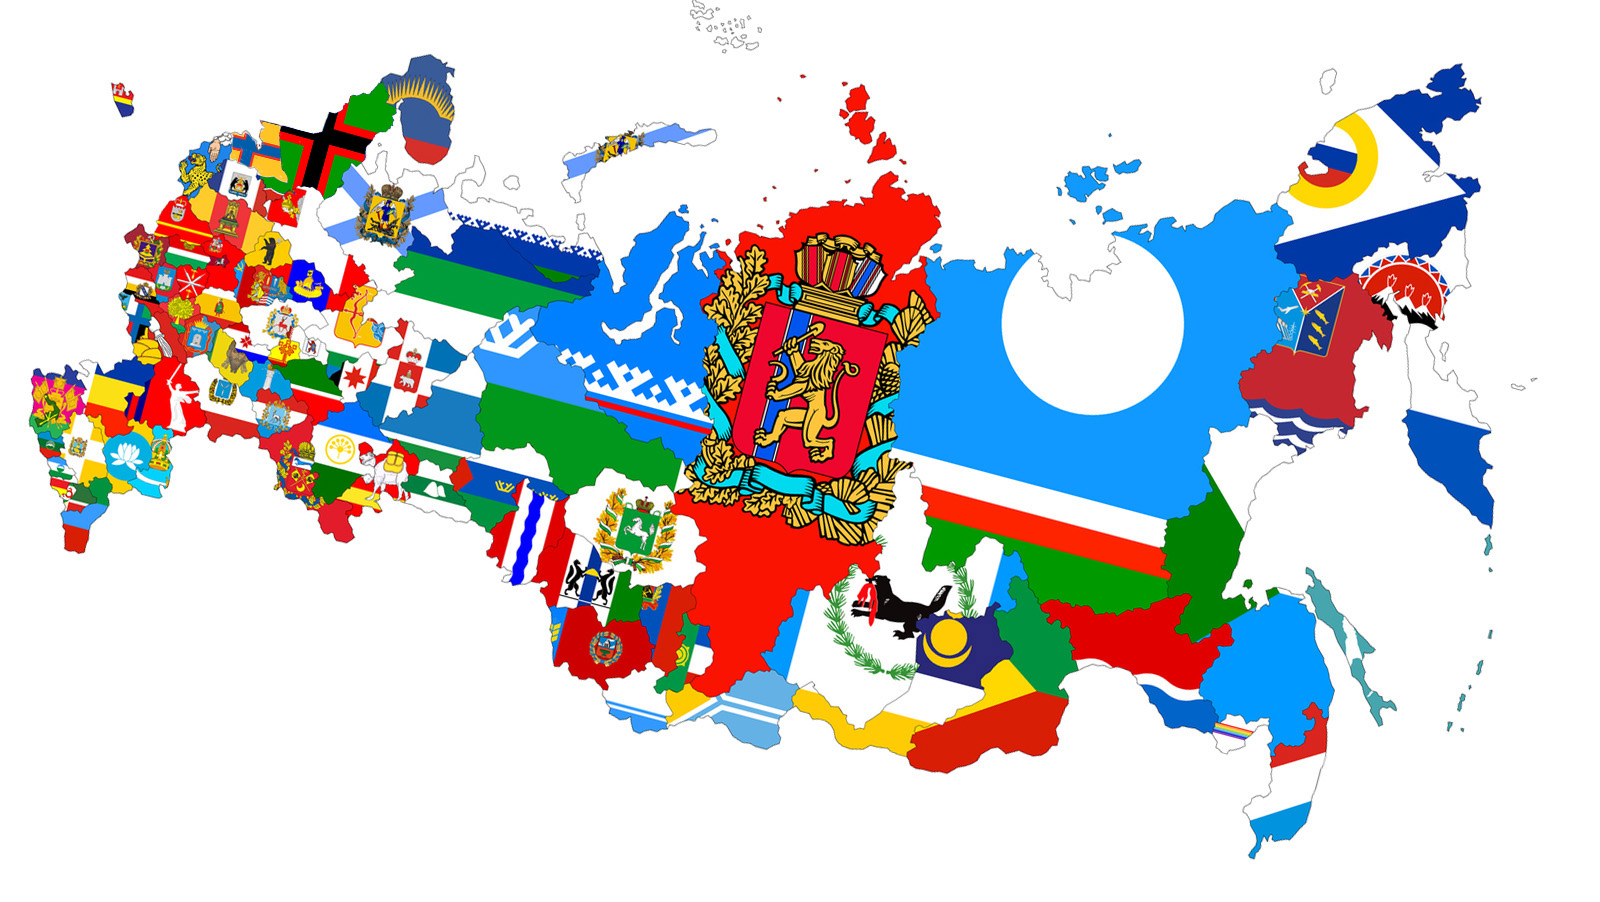 Map of the Russian Federation as a mosaic of regional flags (Image: afterempire.info)